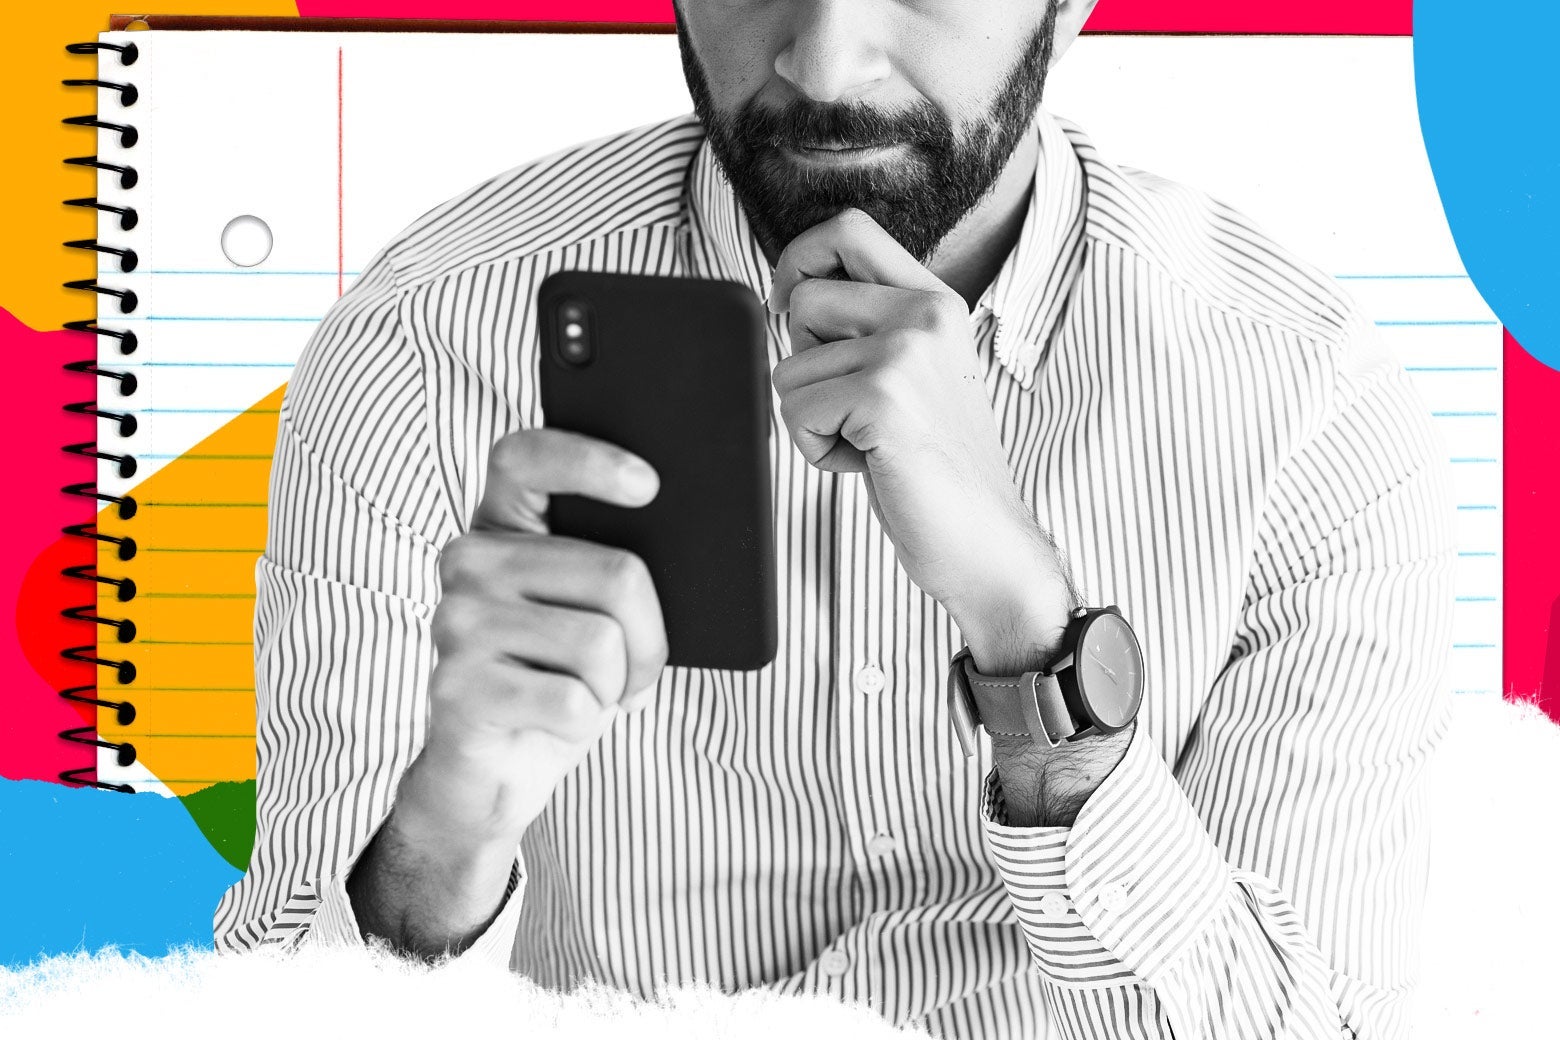 Bearded man in a collared shirt looking thoughtfully at his phone